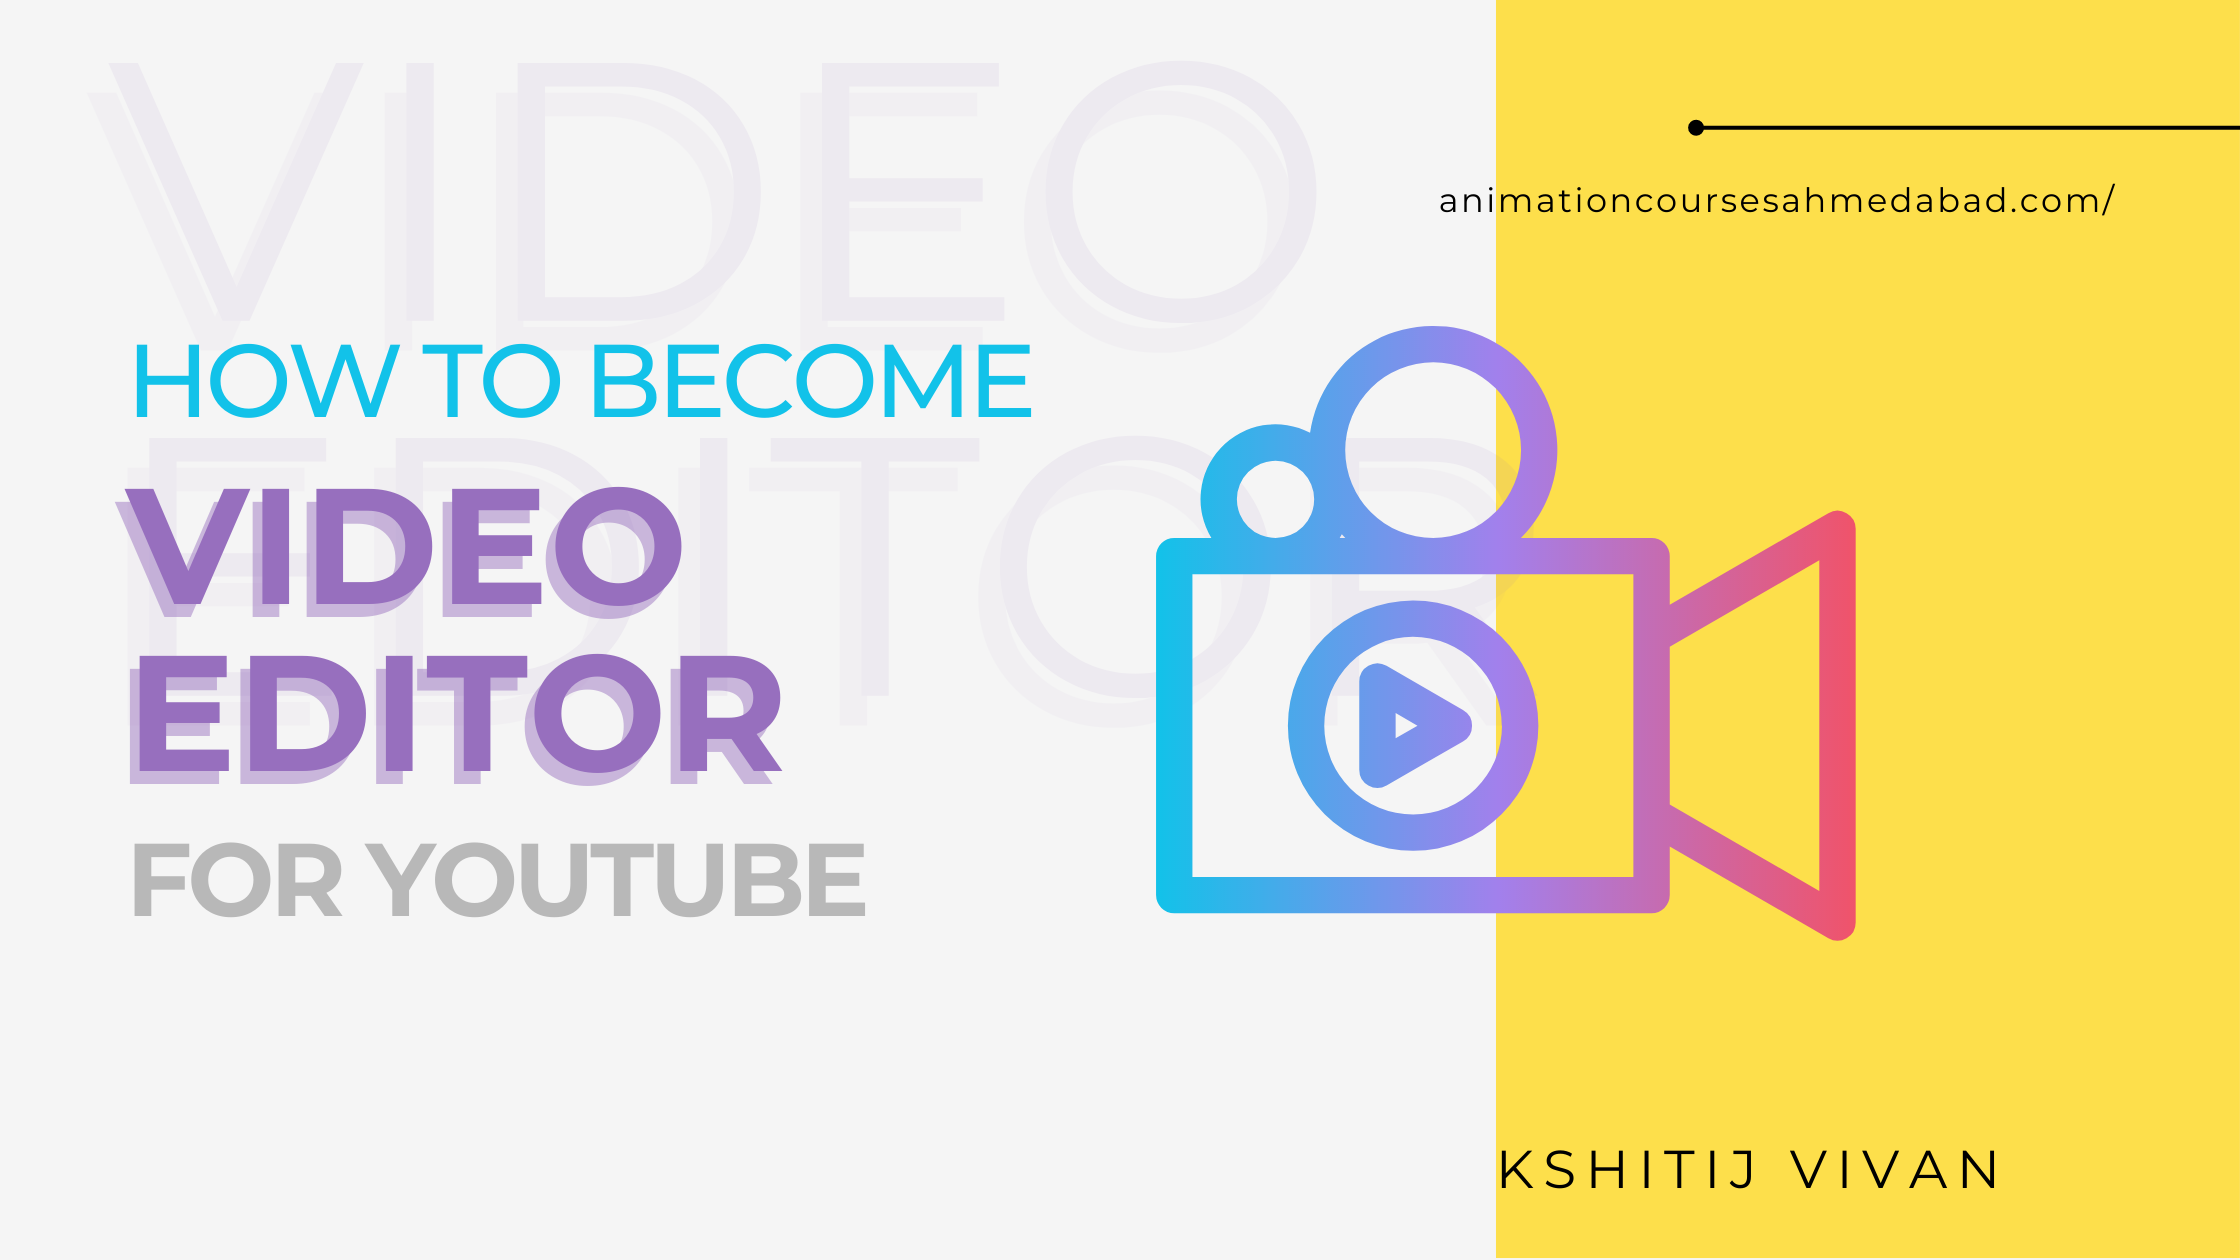 How to become a video editor for YouTube